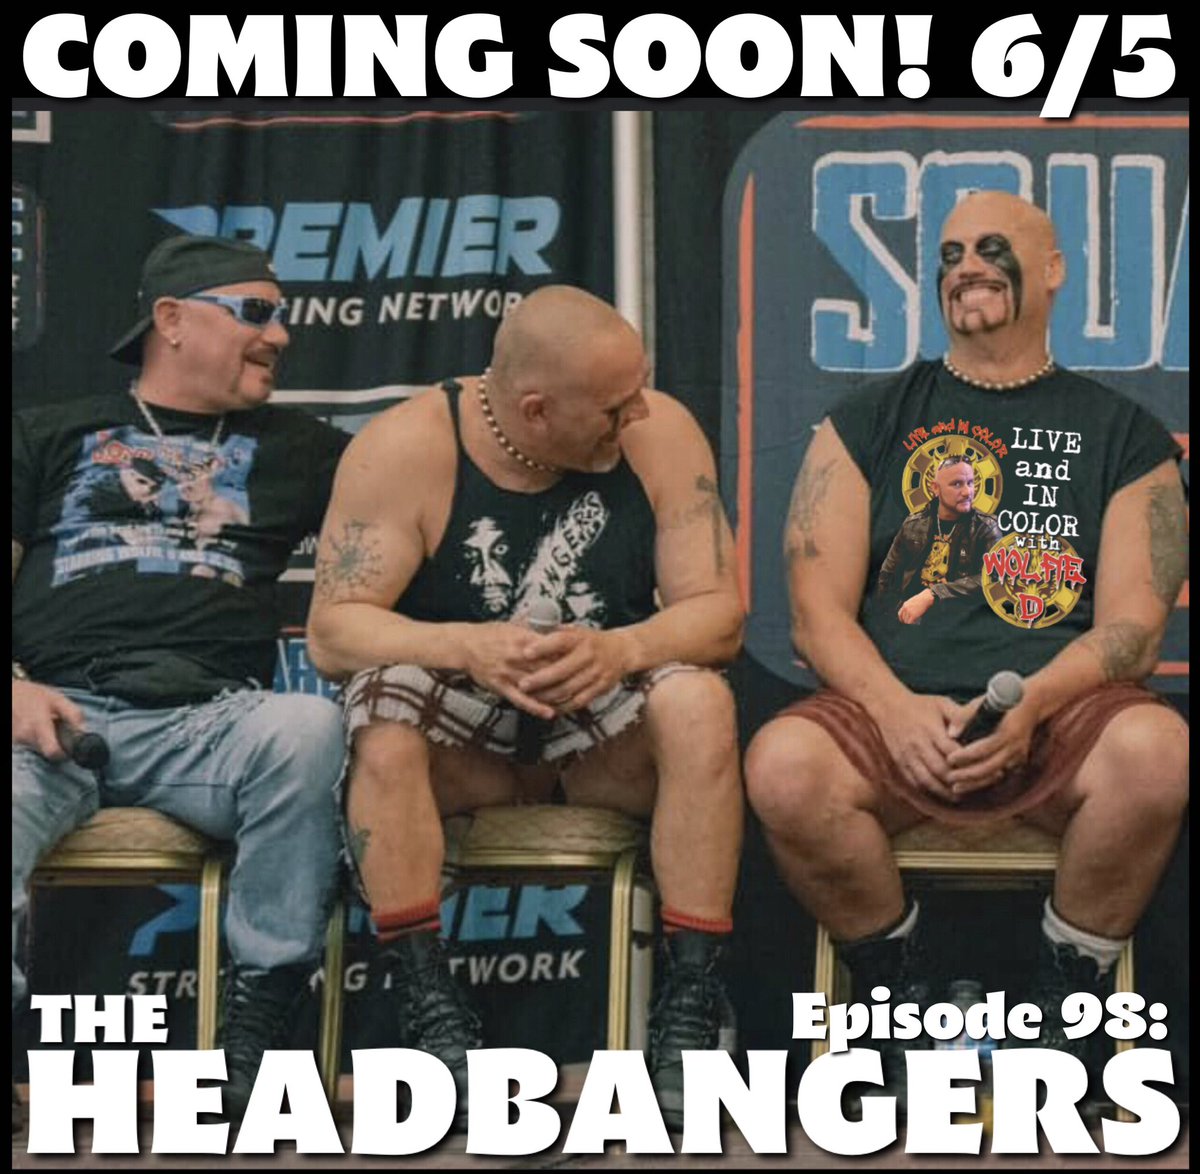 COMING SOON! 6/5! We’ve got #theHeadbangers Mosh and Thrasher! Smoky Mountain, USWA, WWF, Rock & Roll and PG-13! We’re talking Headbangers people! Don’t miss it!